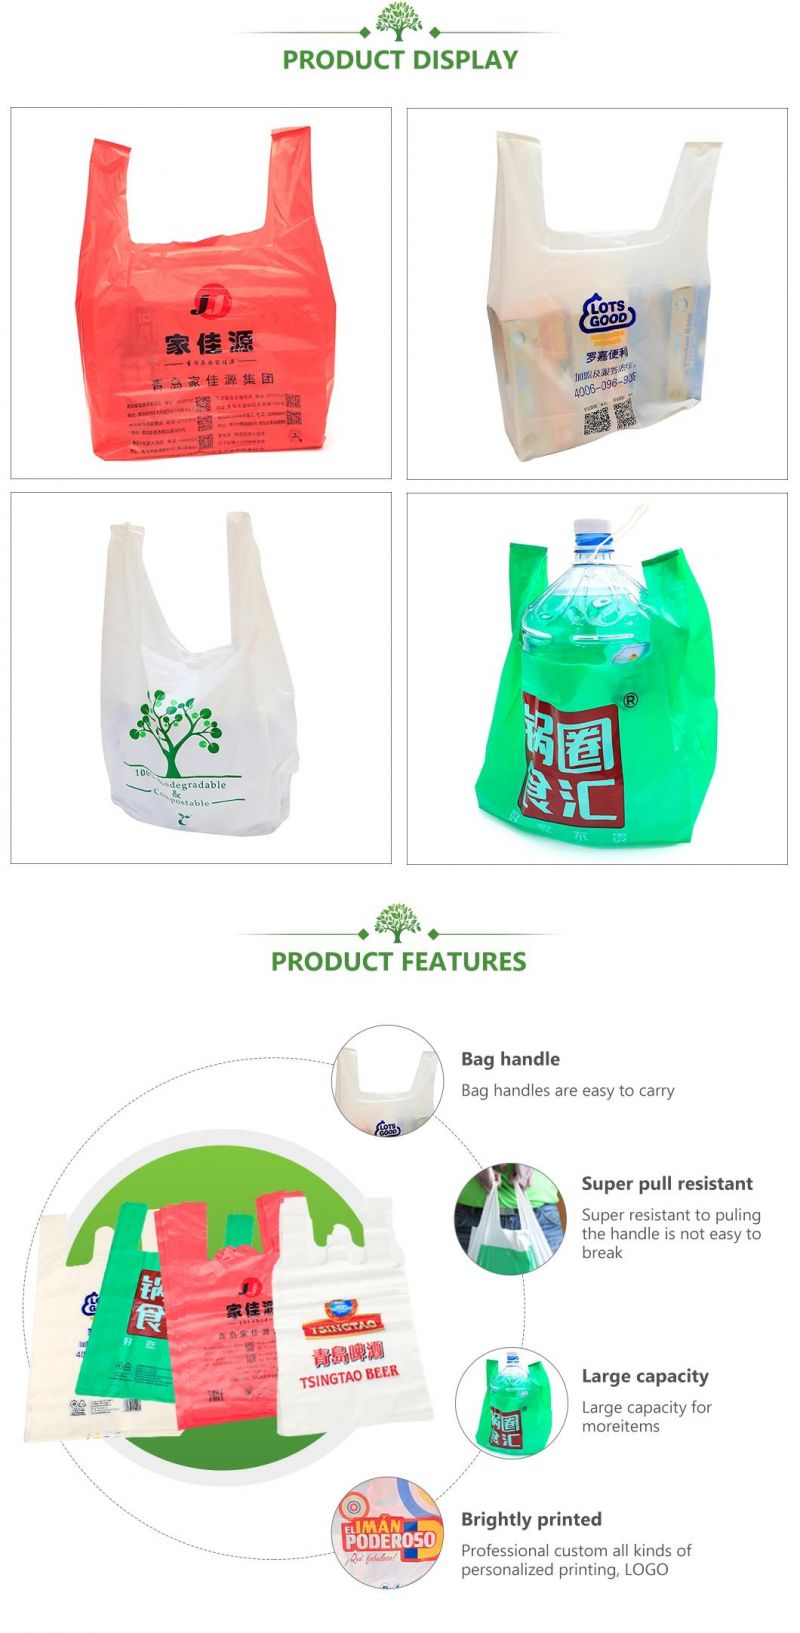 100% Biodegradable Bags, Compostable Bags, Corn Starch Storage Bags Manufacturer